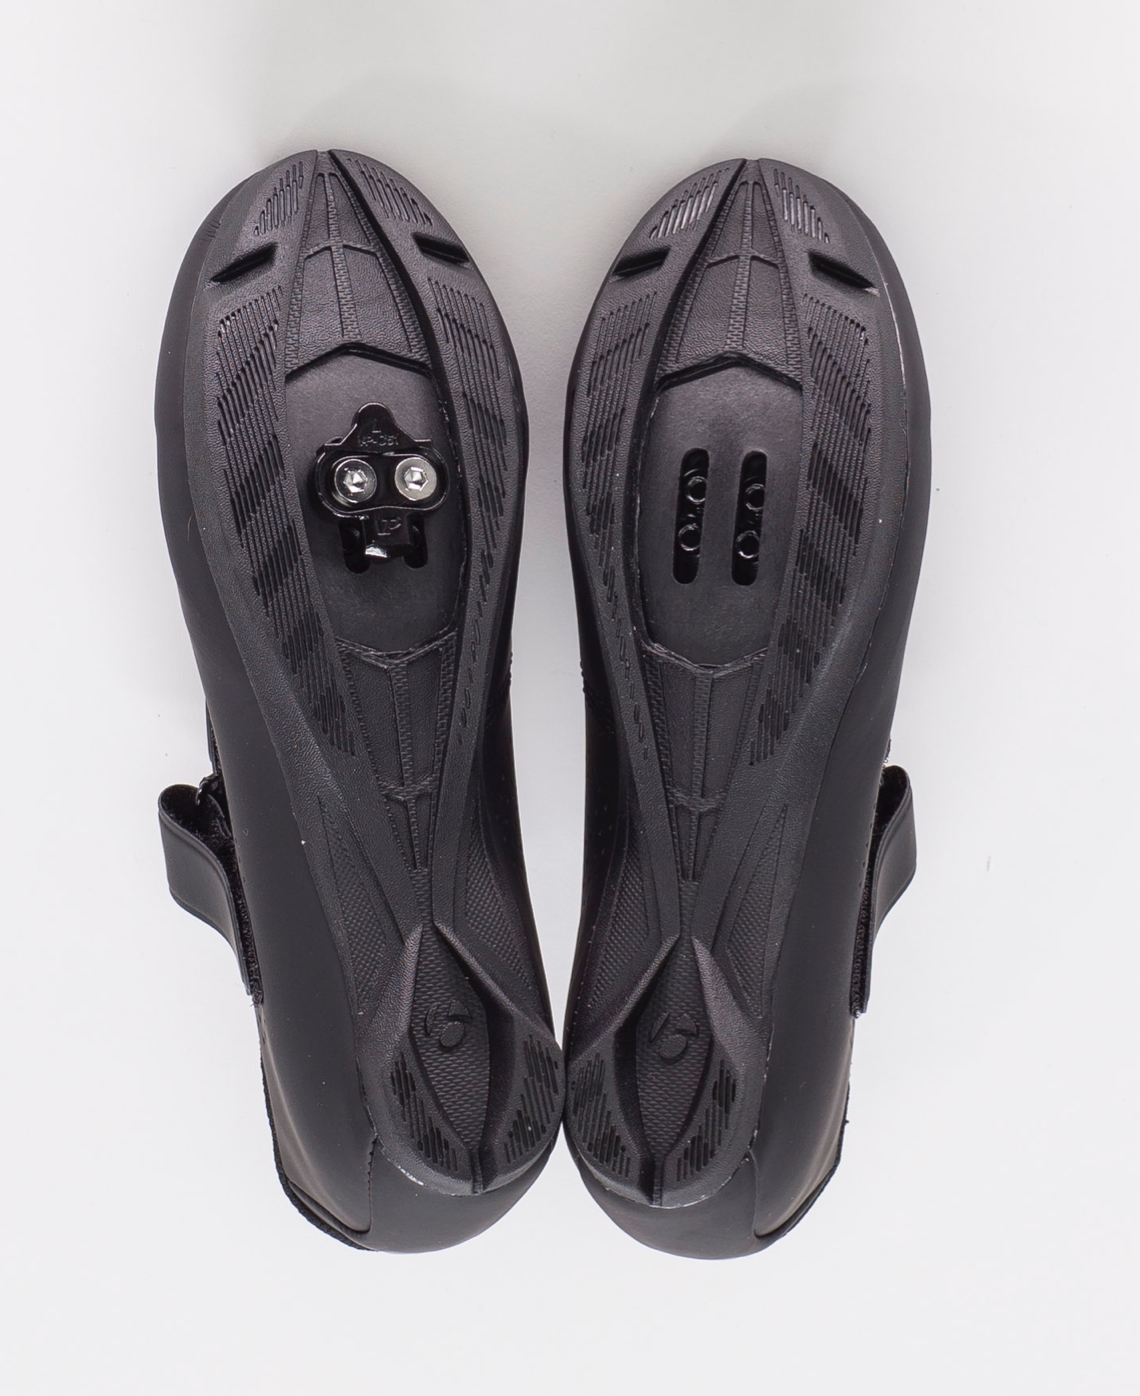 clipless bike shoes